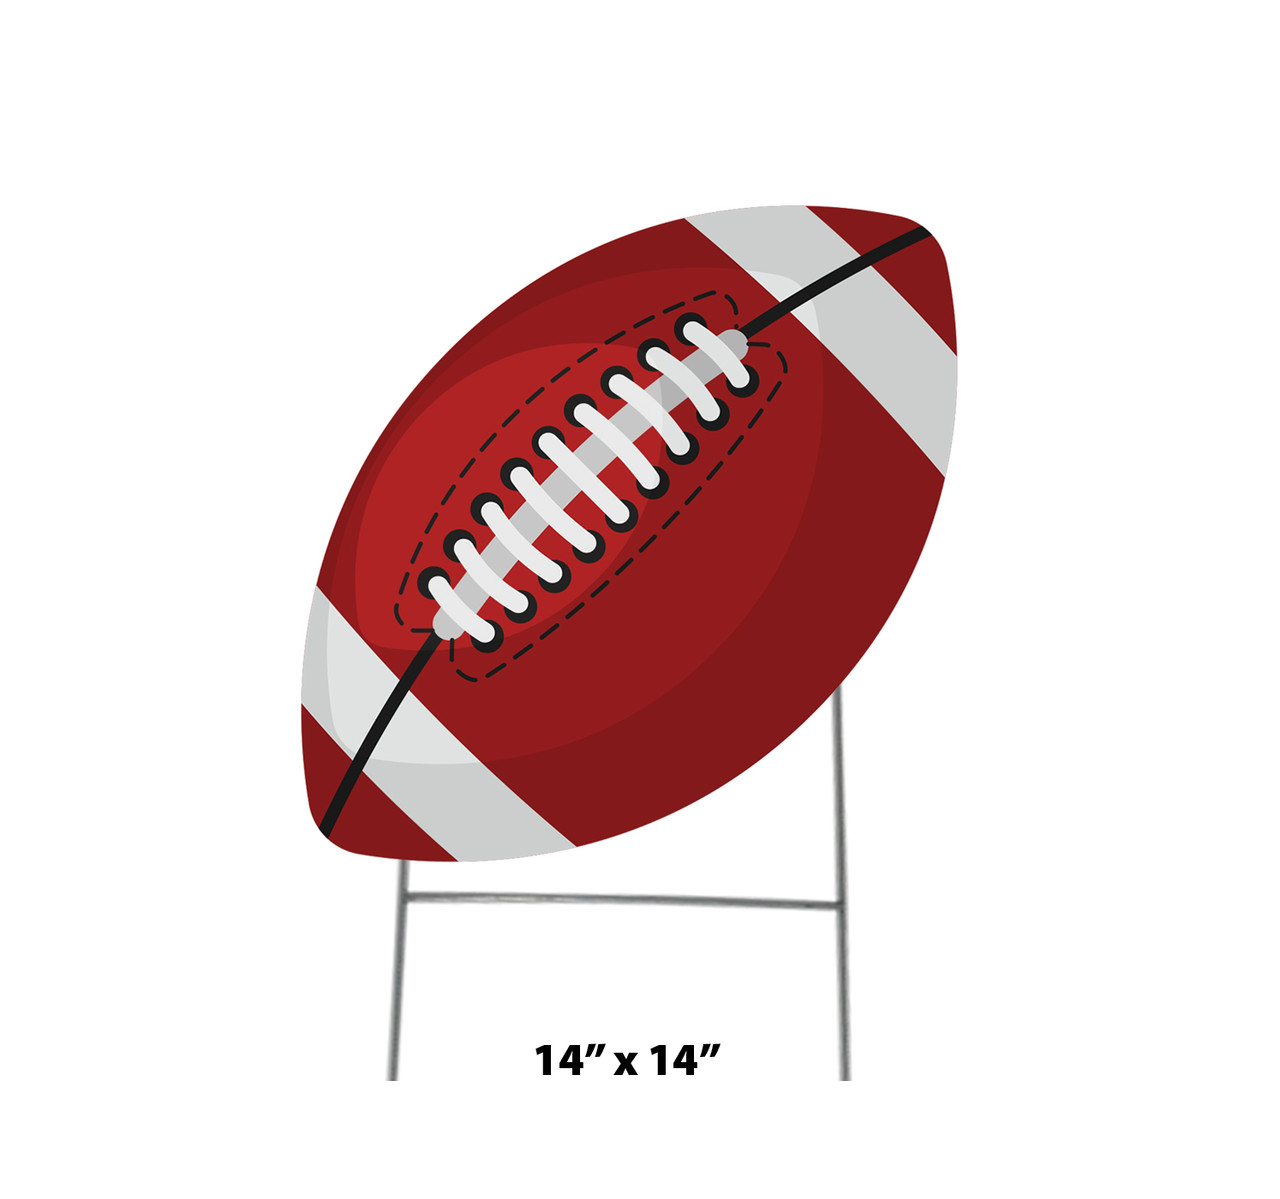 Coroplast outdoor yard sign icon of a football with dimensions.